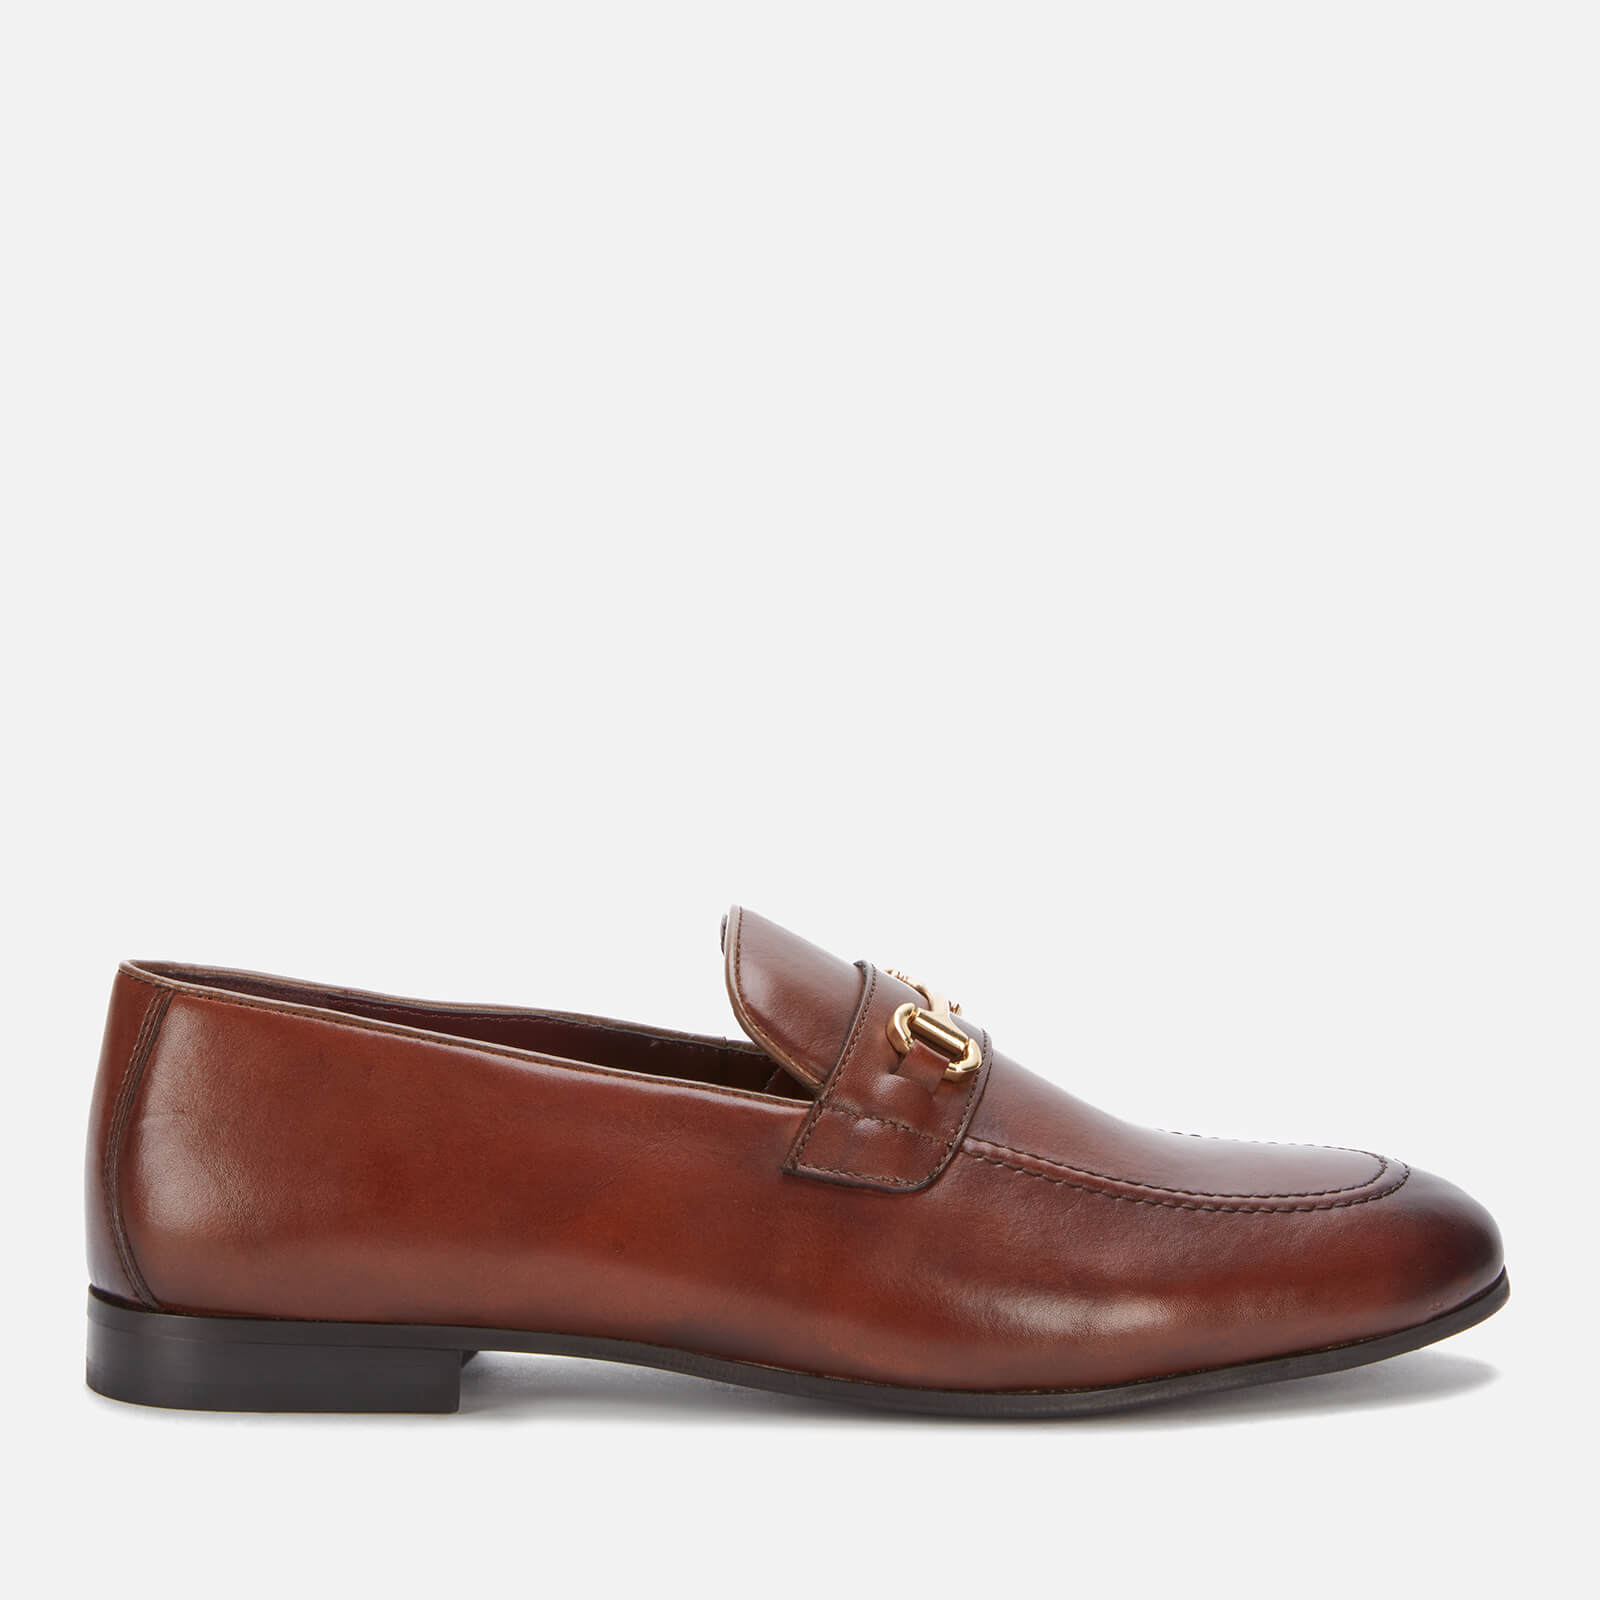 Walk London Men’s Terry Trim Leather Loafers - Brown